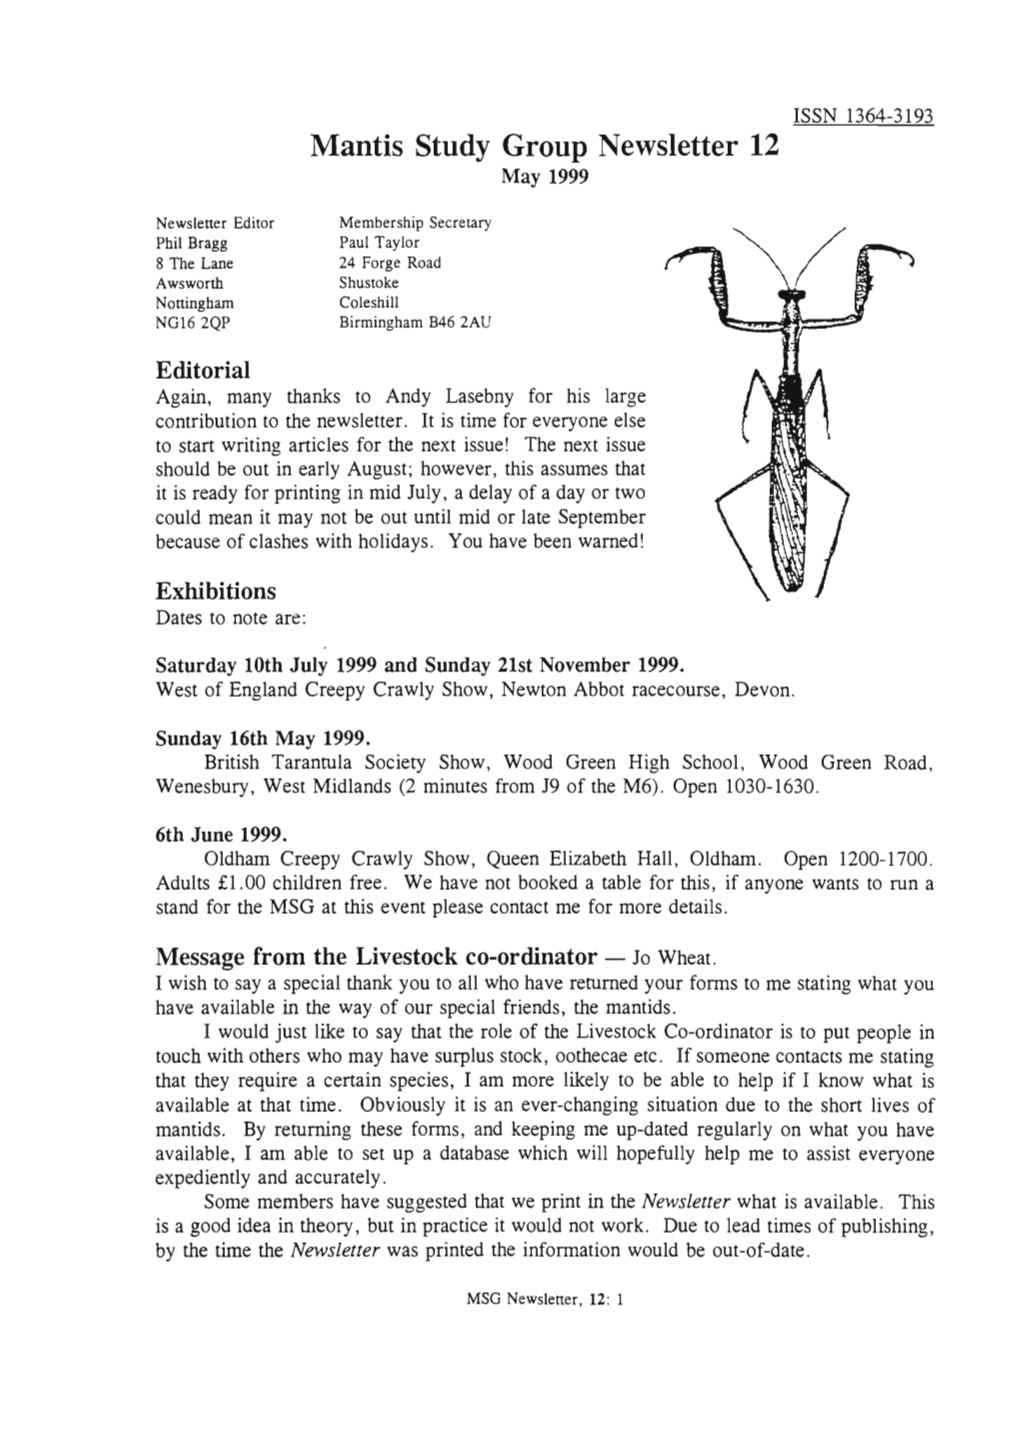 Mantis Study Group Newsletter 12 (May 1999)